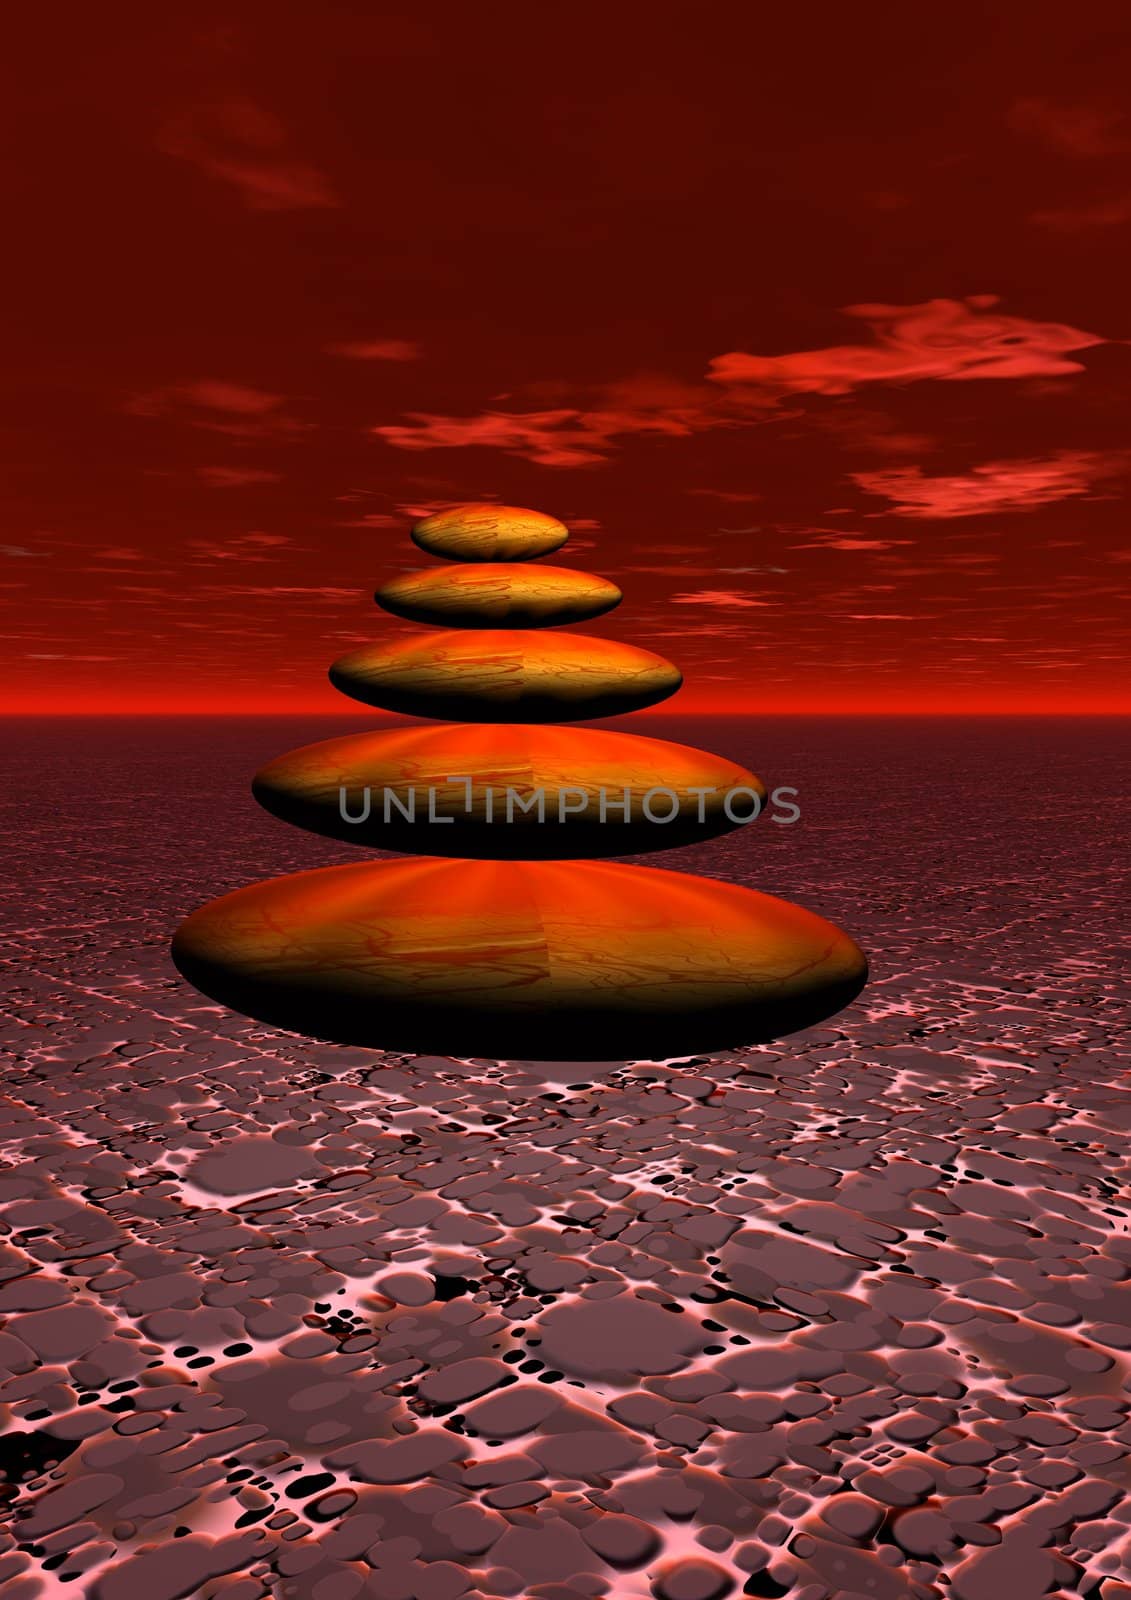 Balanced stones in the desert by cloudy sunset